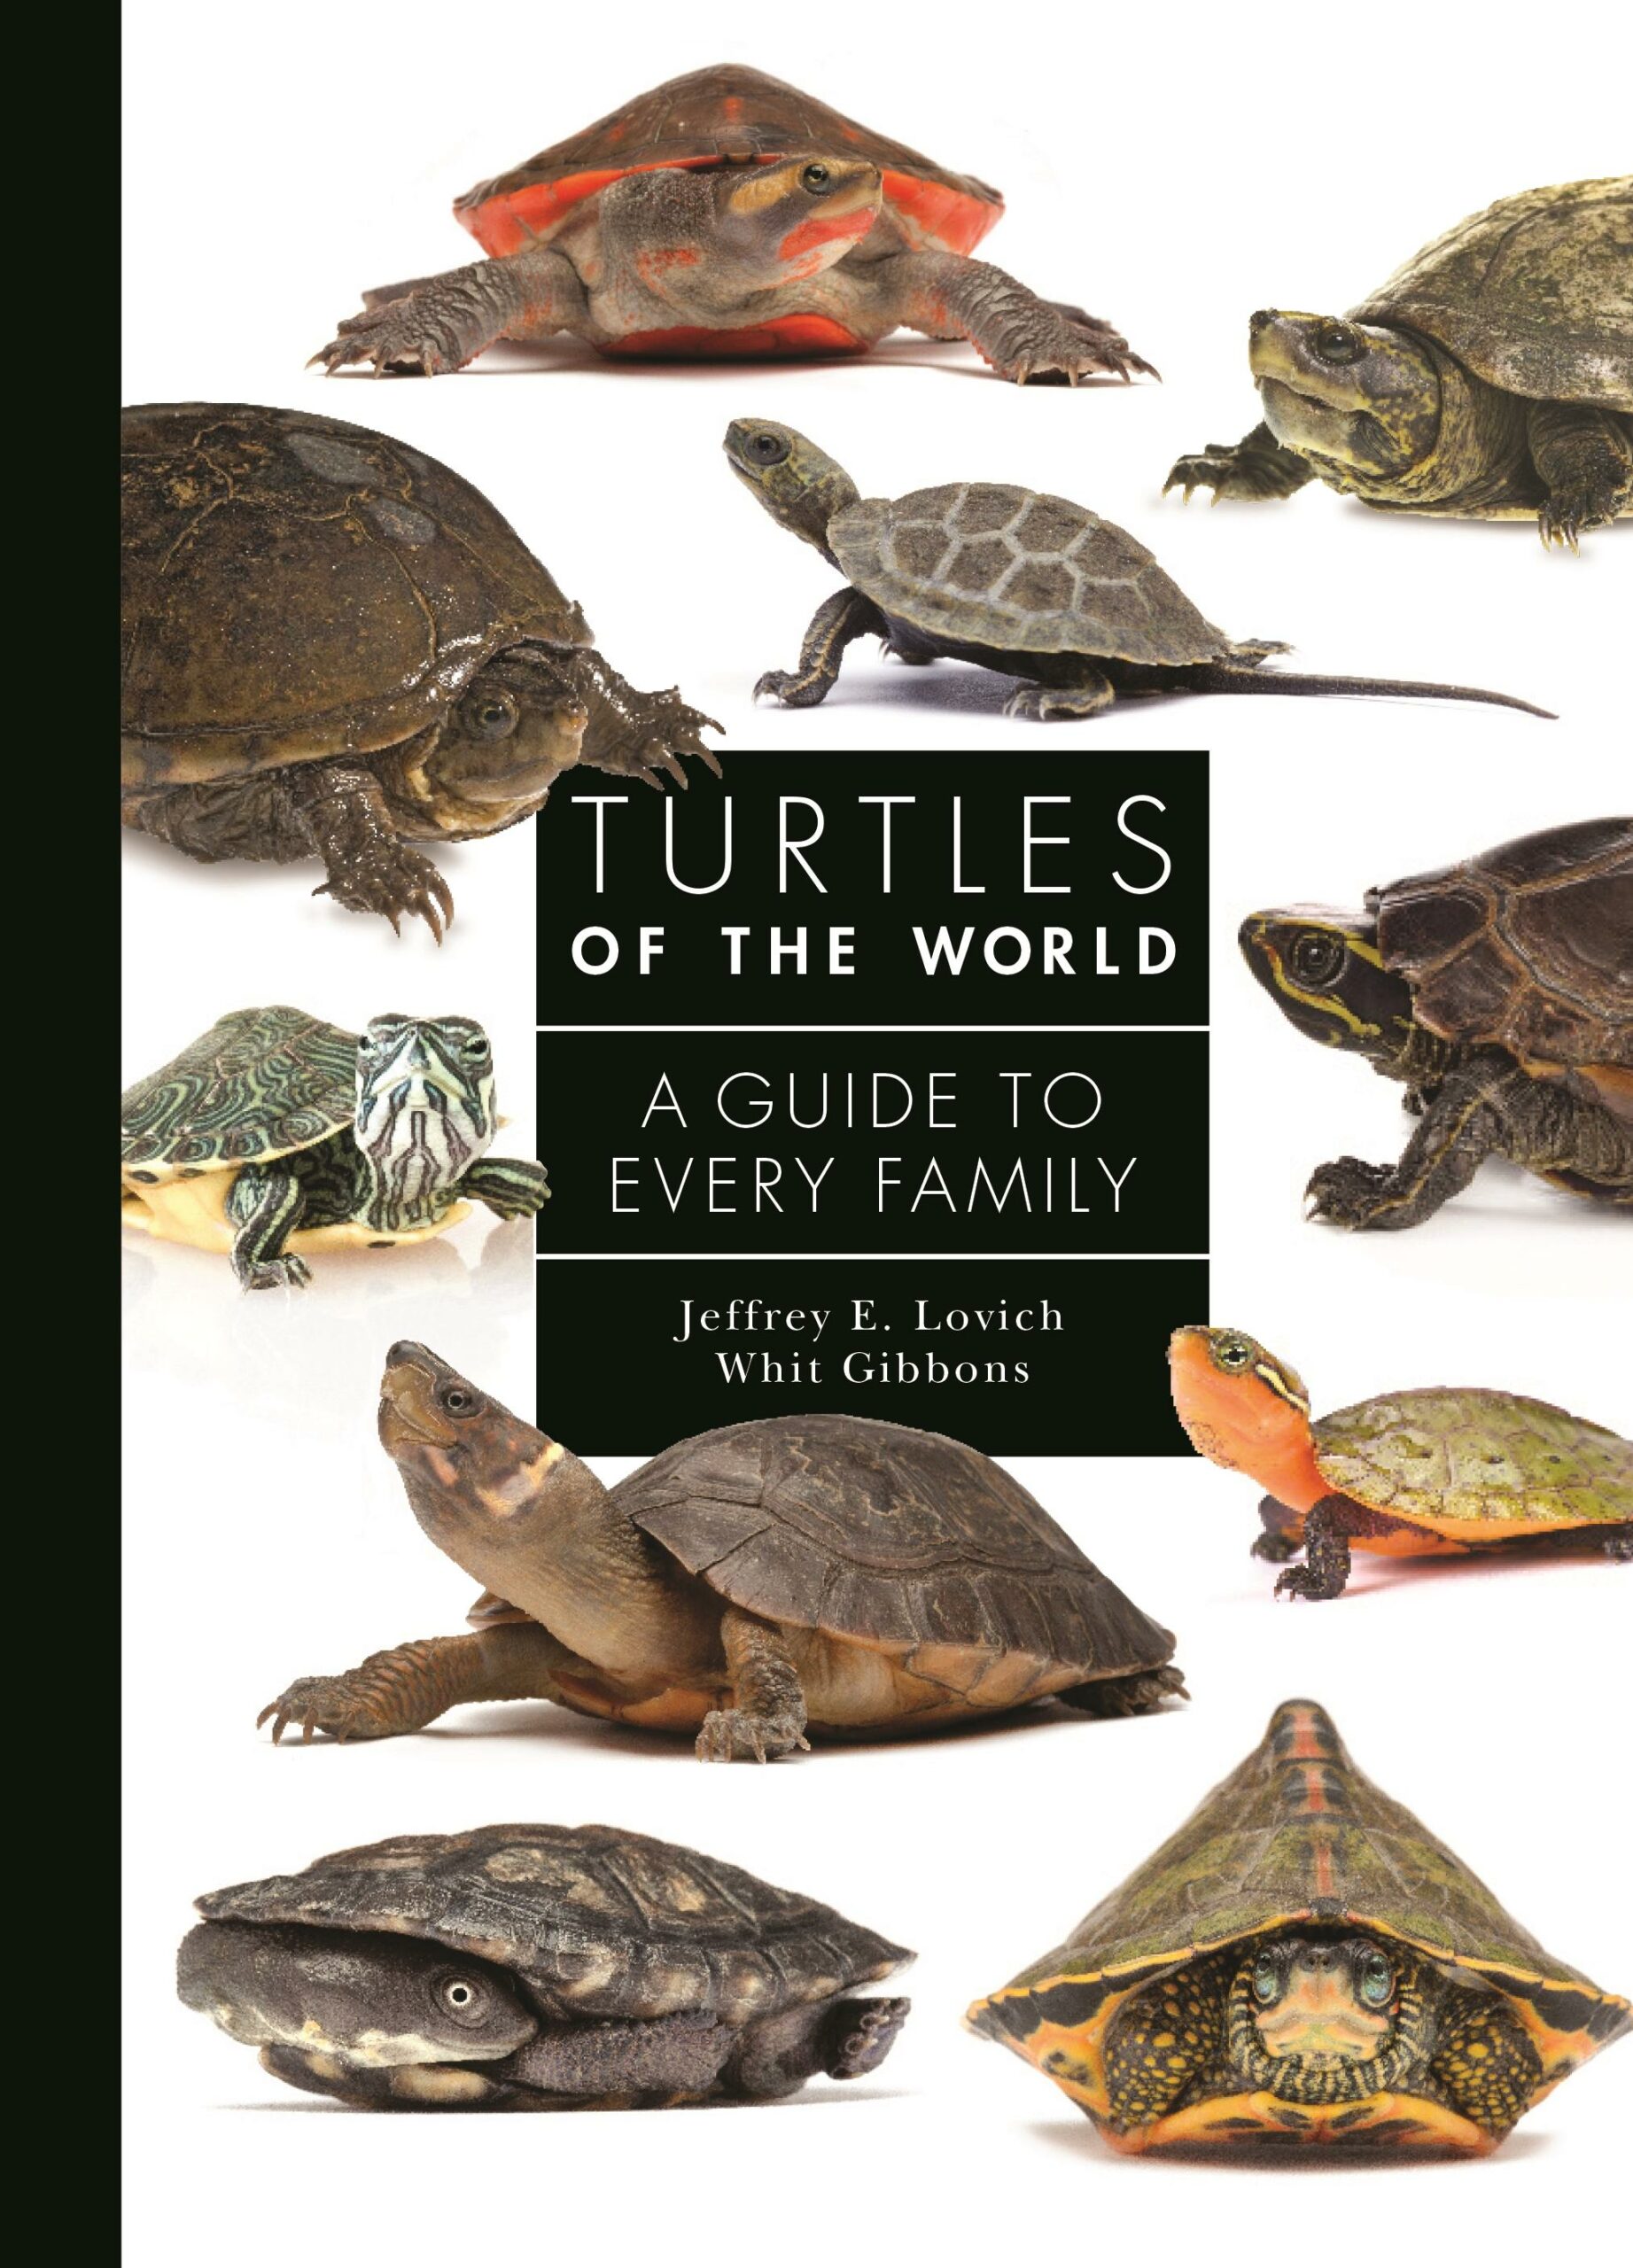 Turtles of the world: A guide to every family